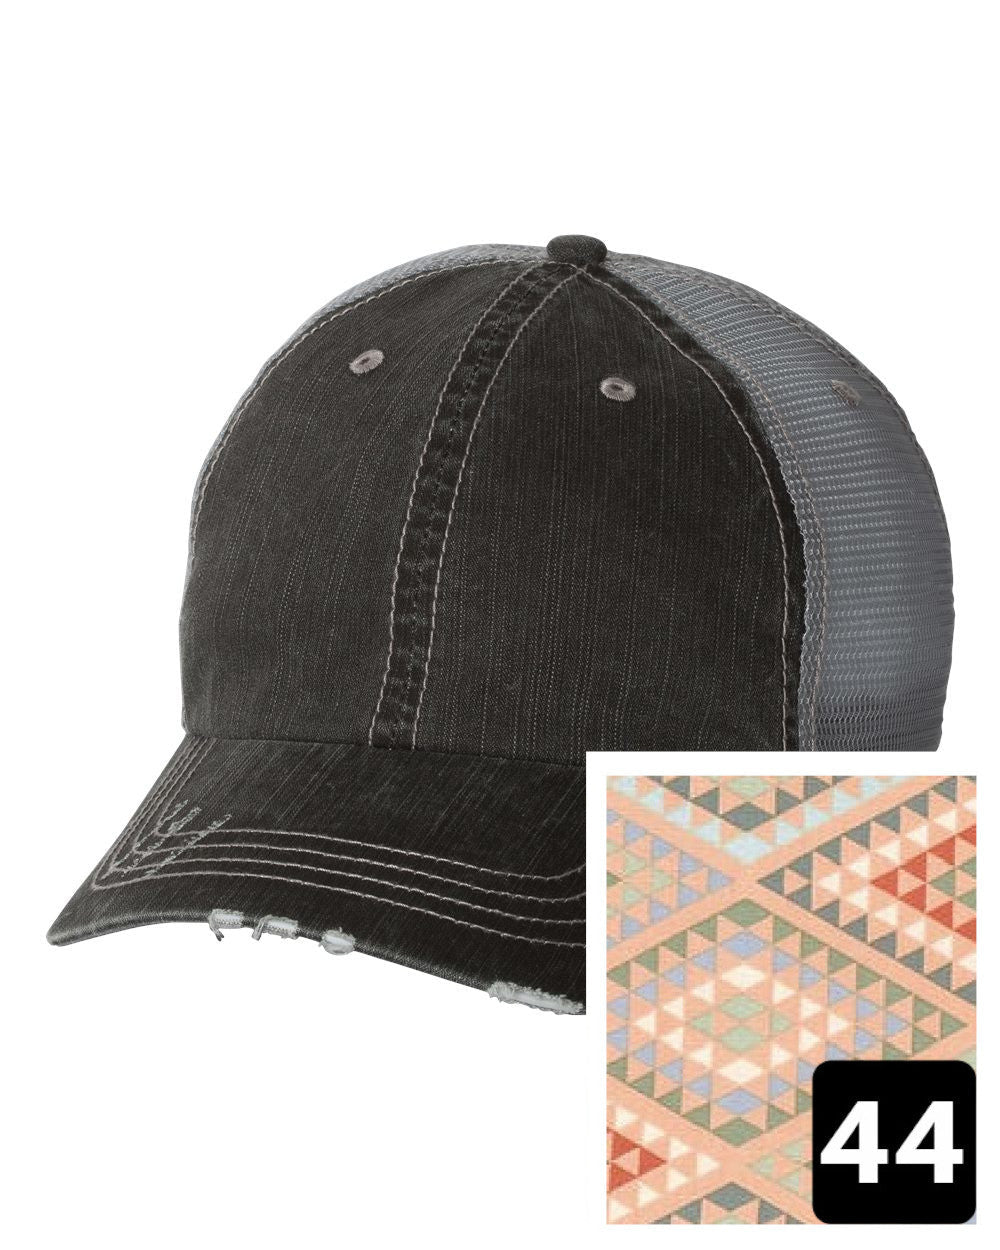 gray distressed trucker hat with navy coral and white chevron fabric state of Arizona